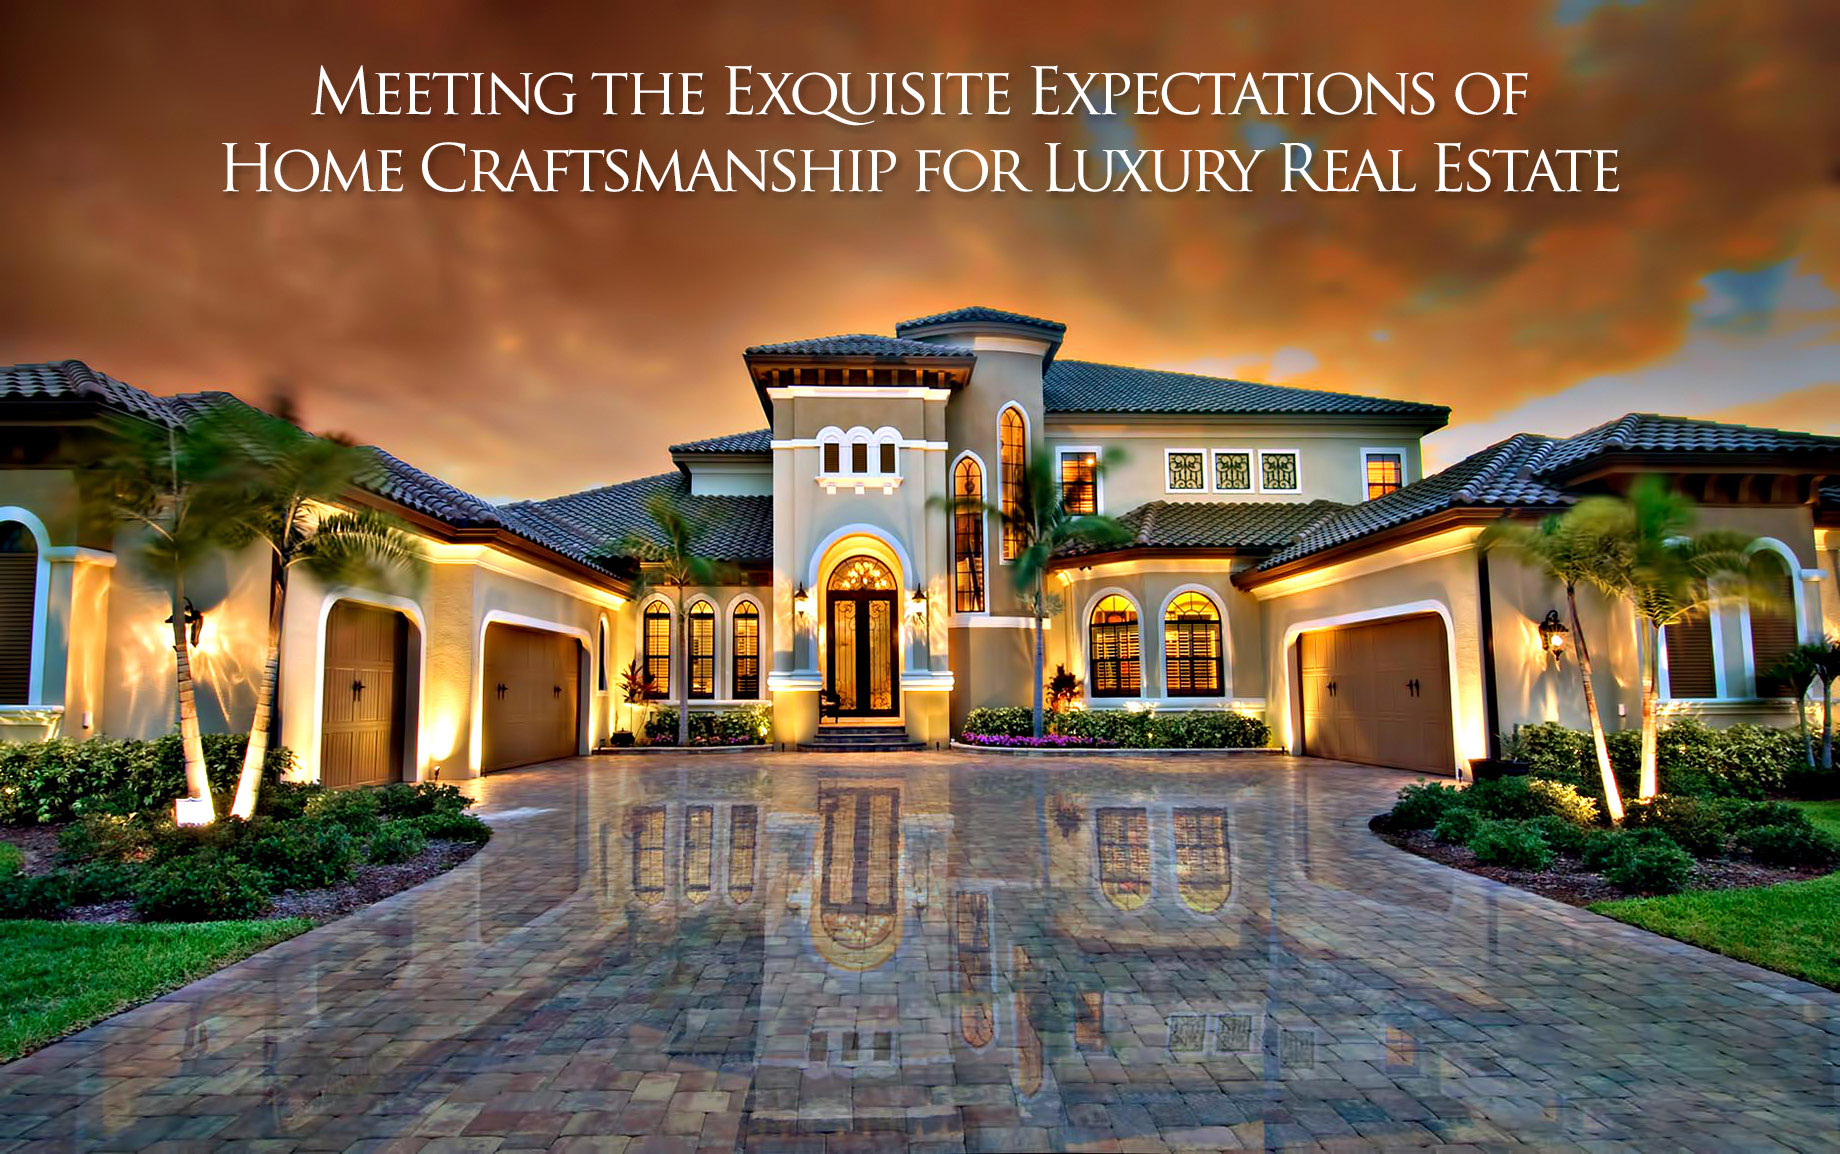 Meeting the Exquisite Expectations of Home Craftsmanship for Luxury Real Estate